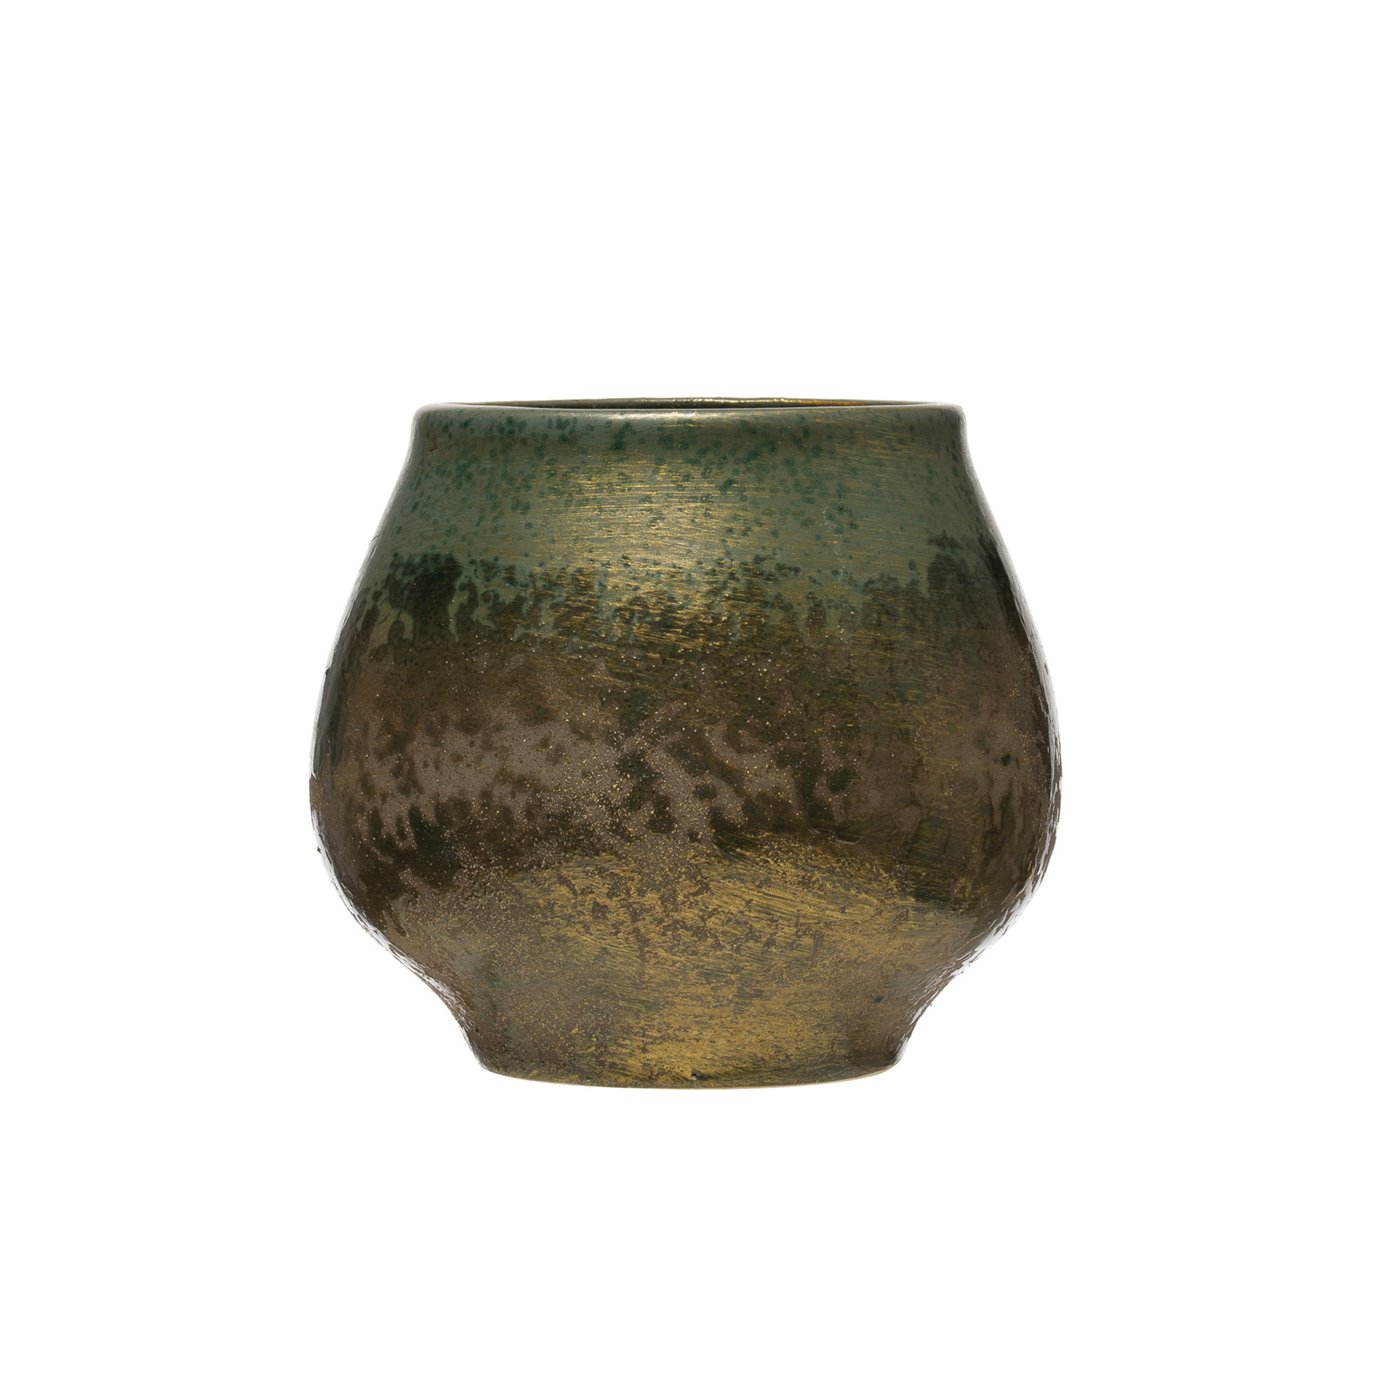 Stoneware Planter with Iridescent Reactive Glaze Finish (Holds 6" pot/Each one will vary)